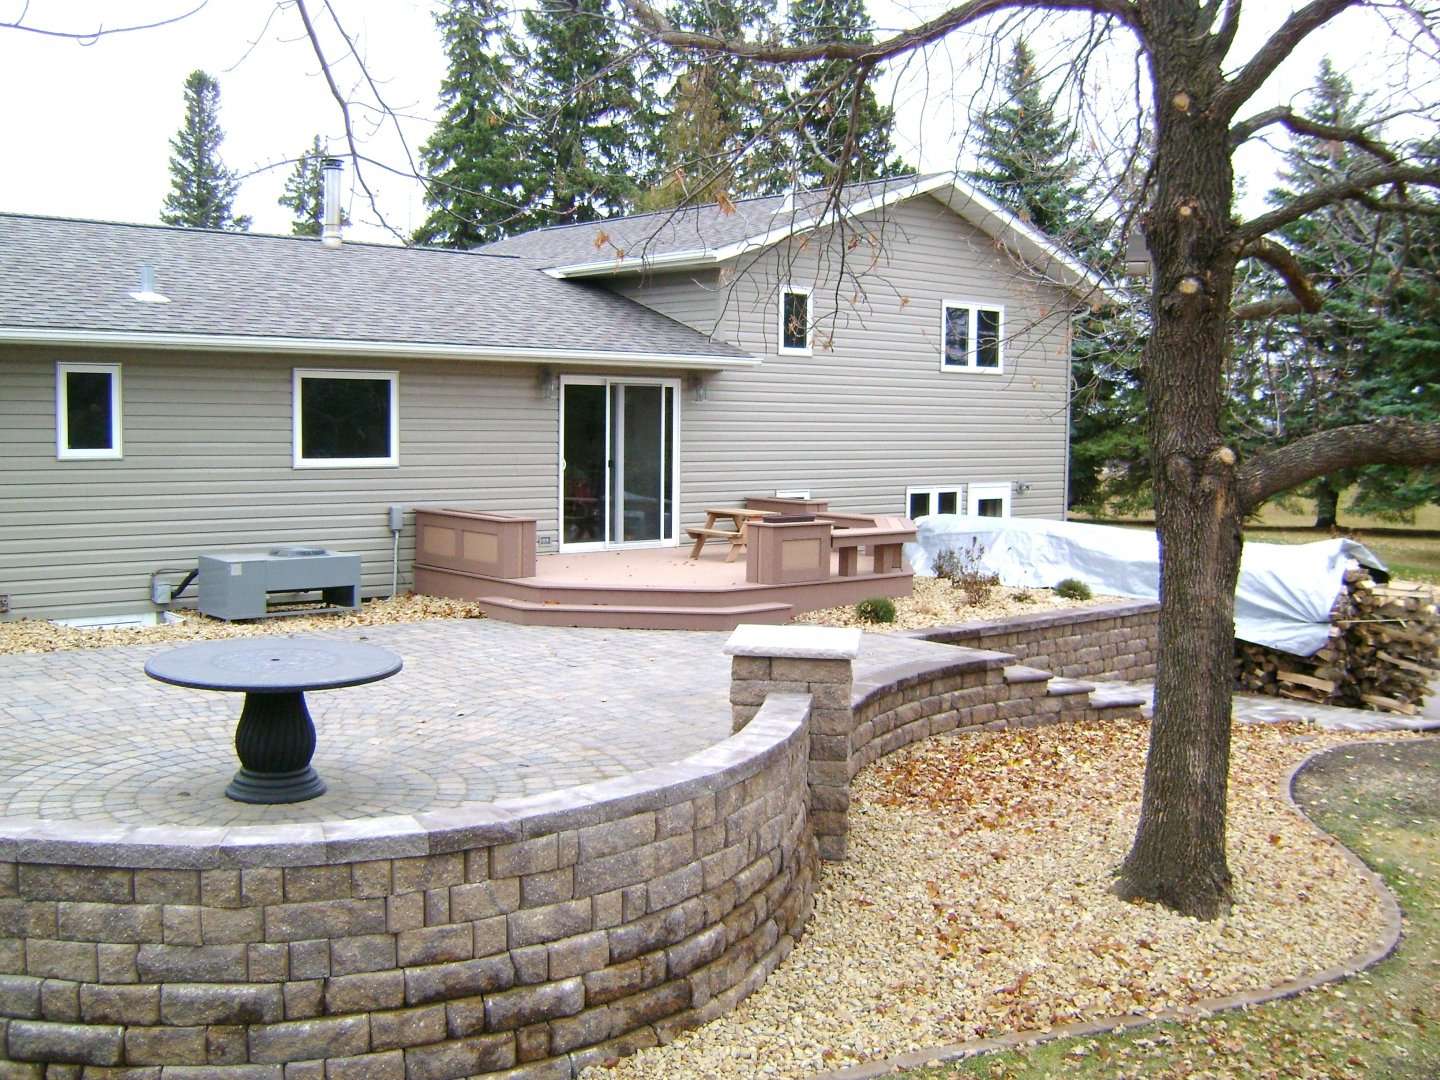 Raised Paver Patio with Retaining Walls, Stairs, Deck, and ...